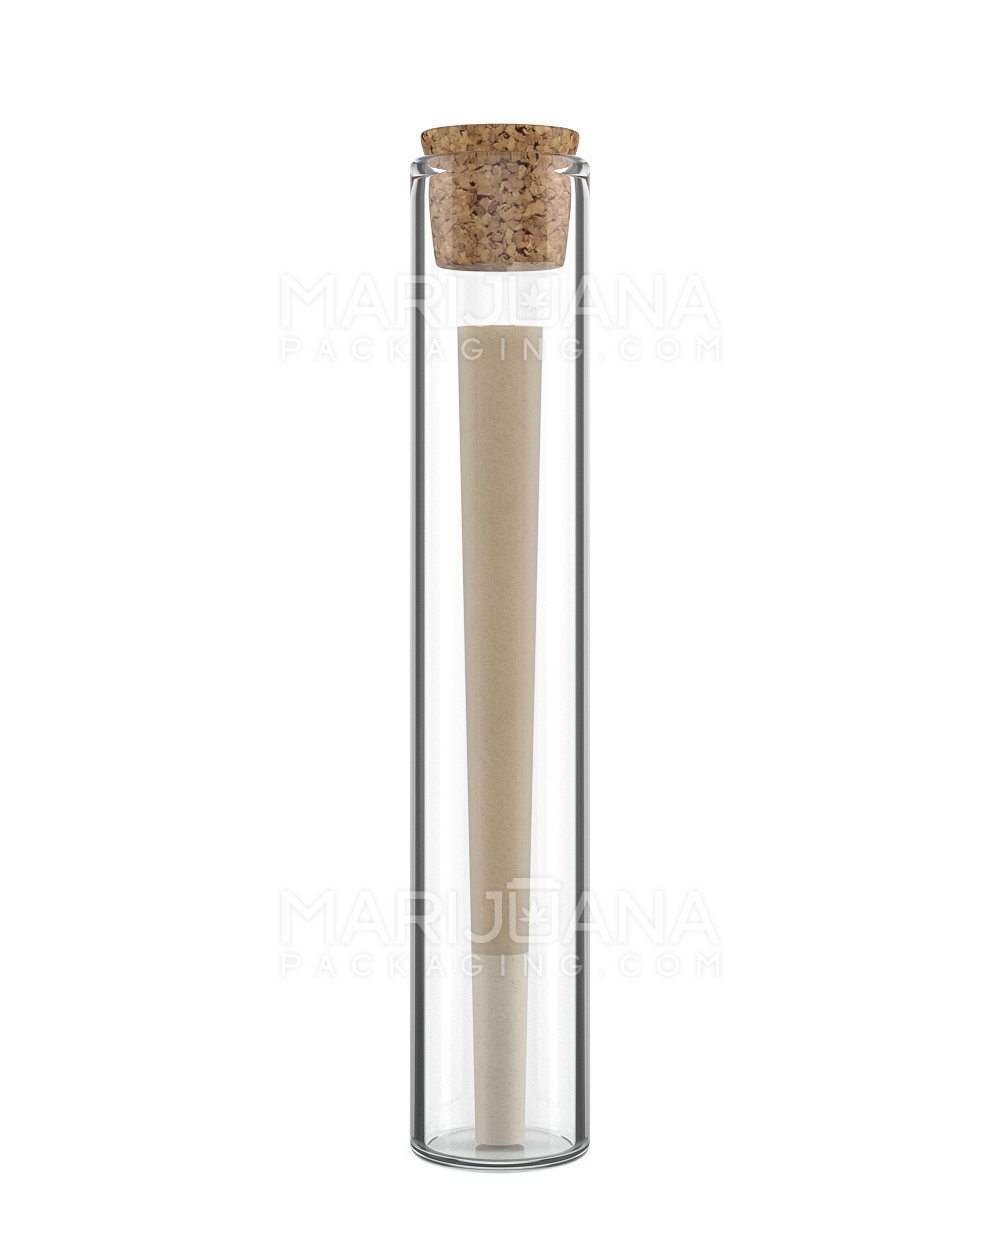 Glass Pre-Roll Tube with Cork Top | 120mm - Clear Glass - 640 Count - 2